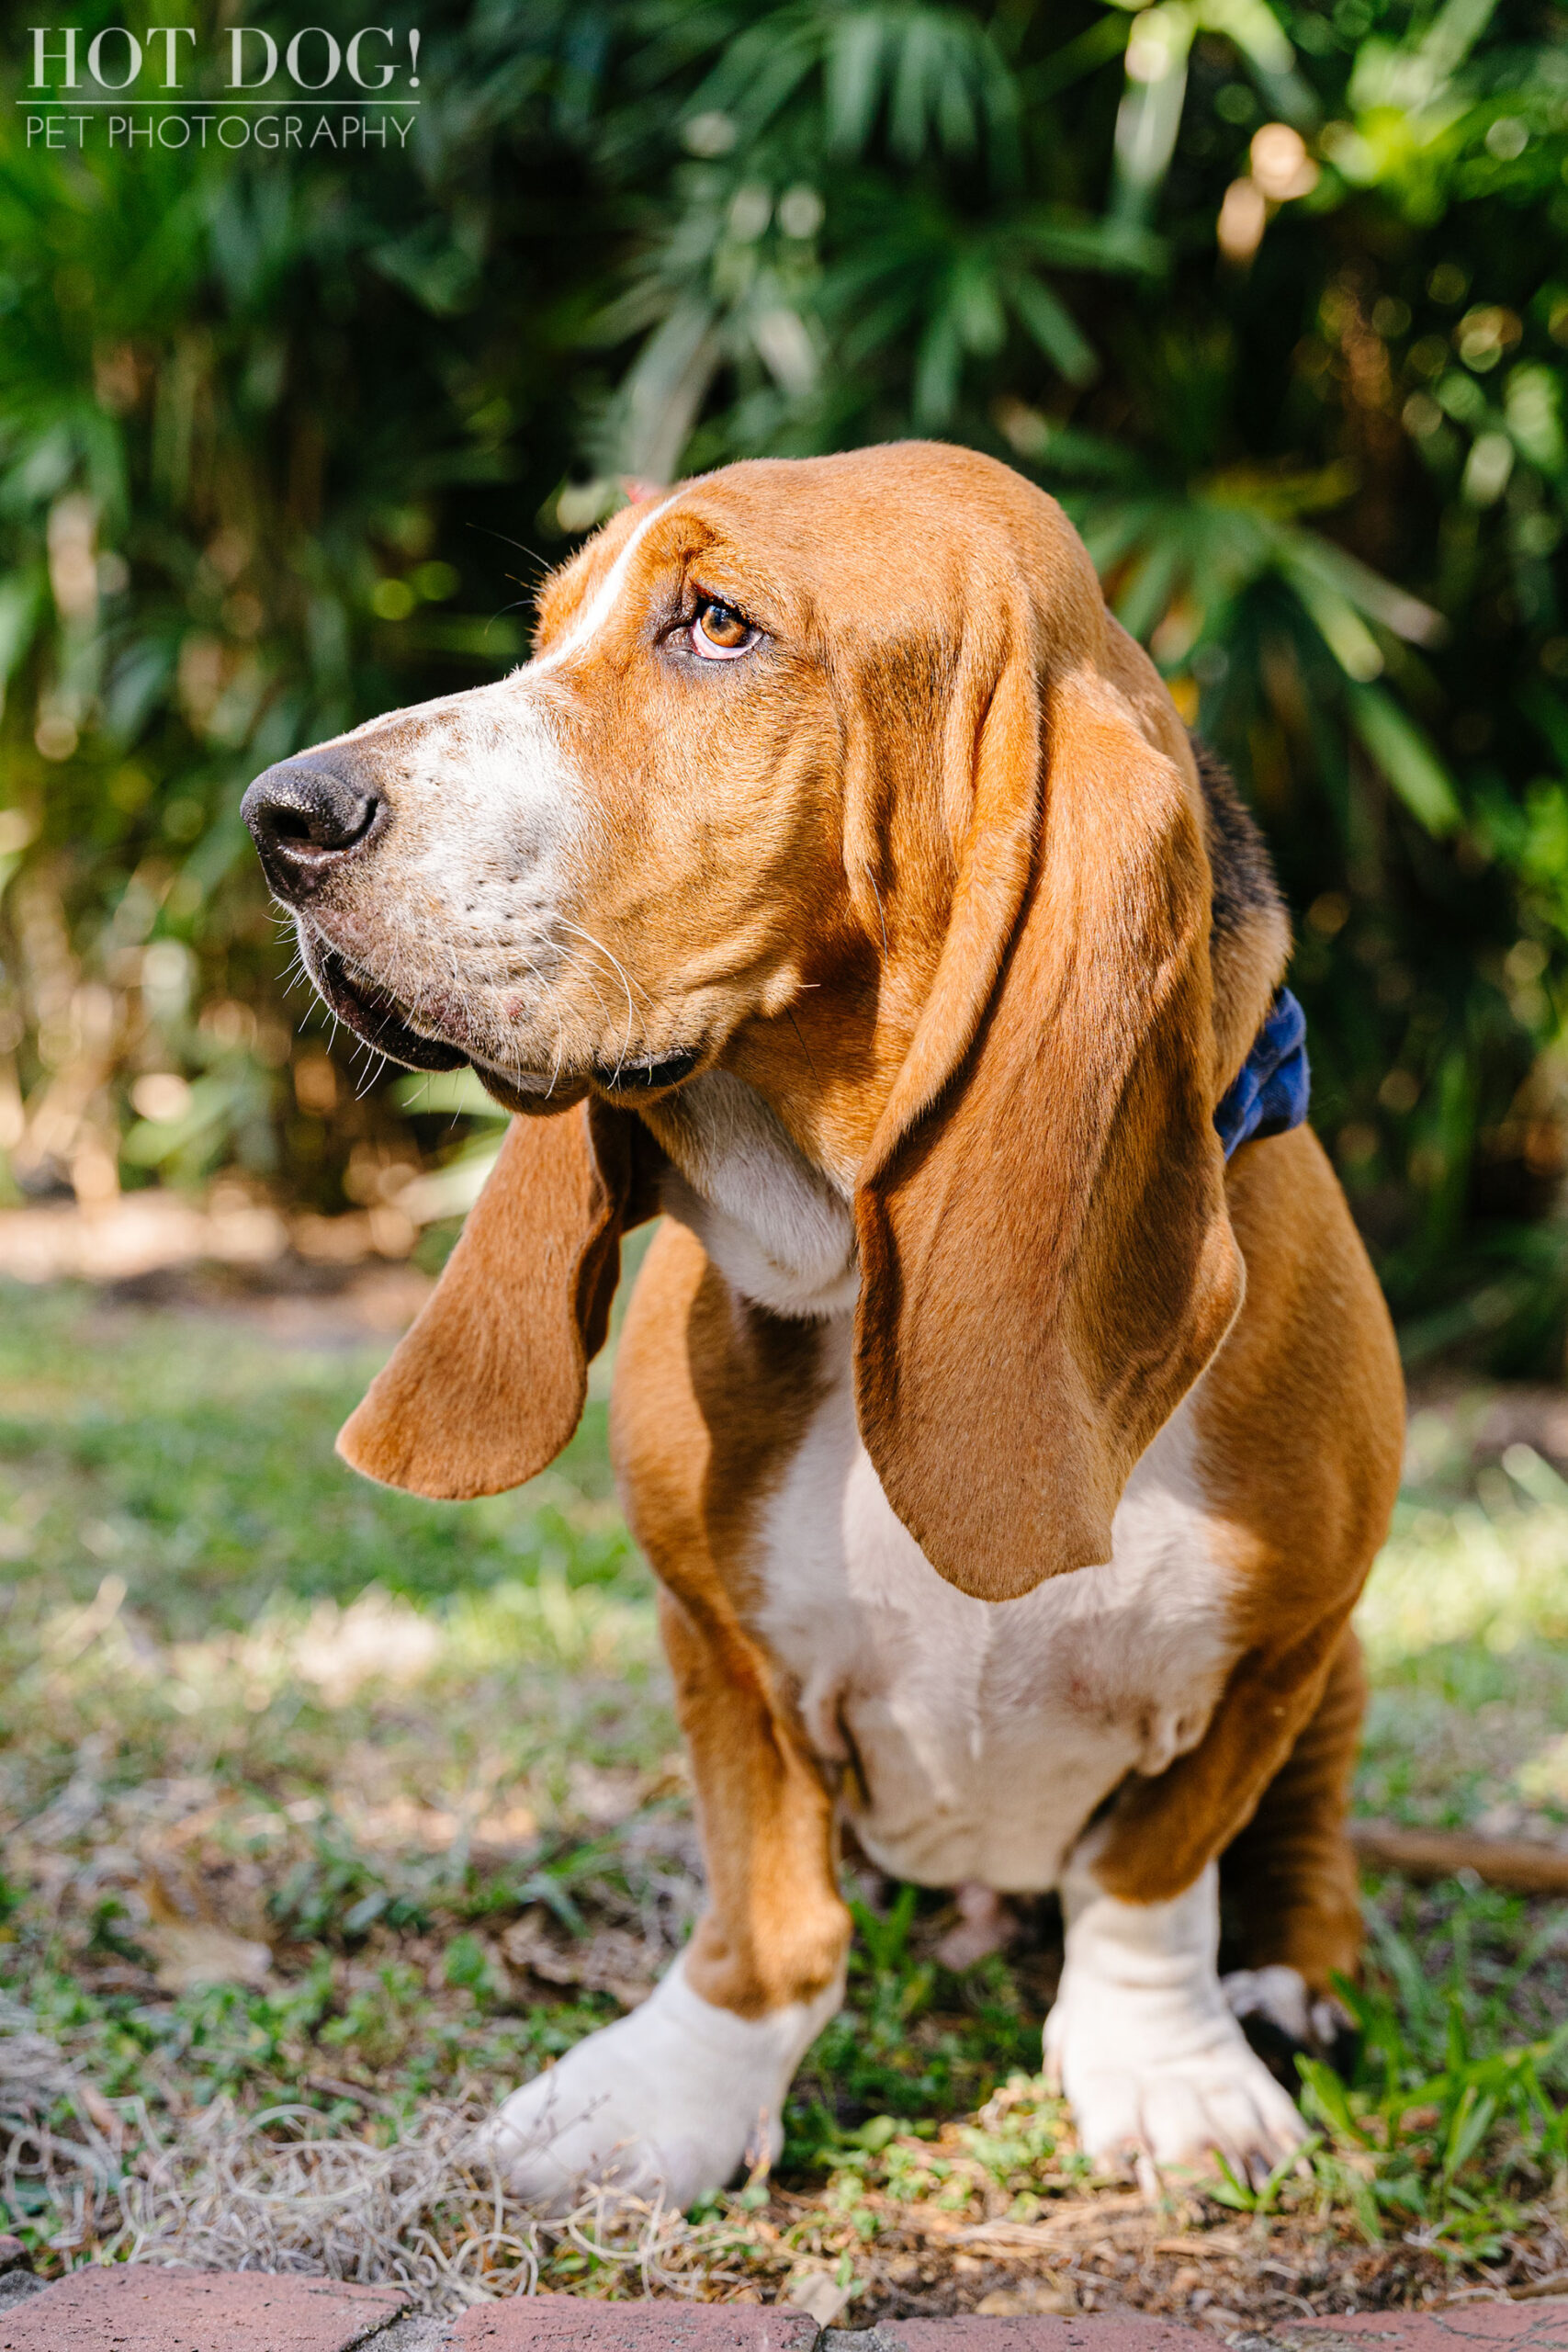 Basset hounds are the focus of a professional pet portrait in Orlando, Florida.